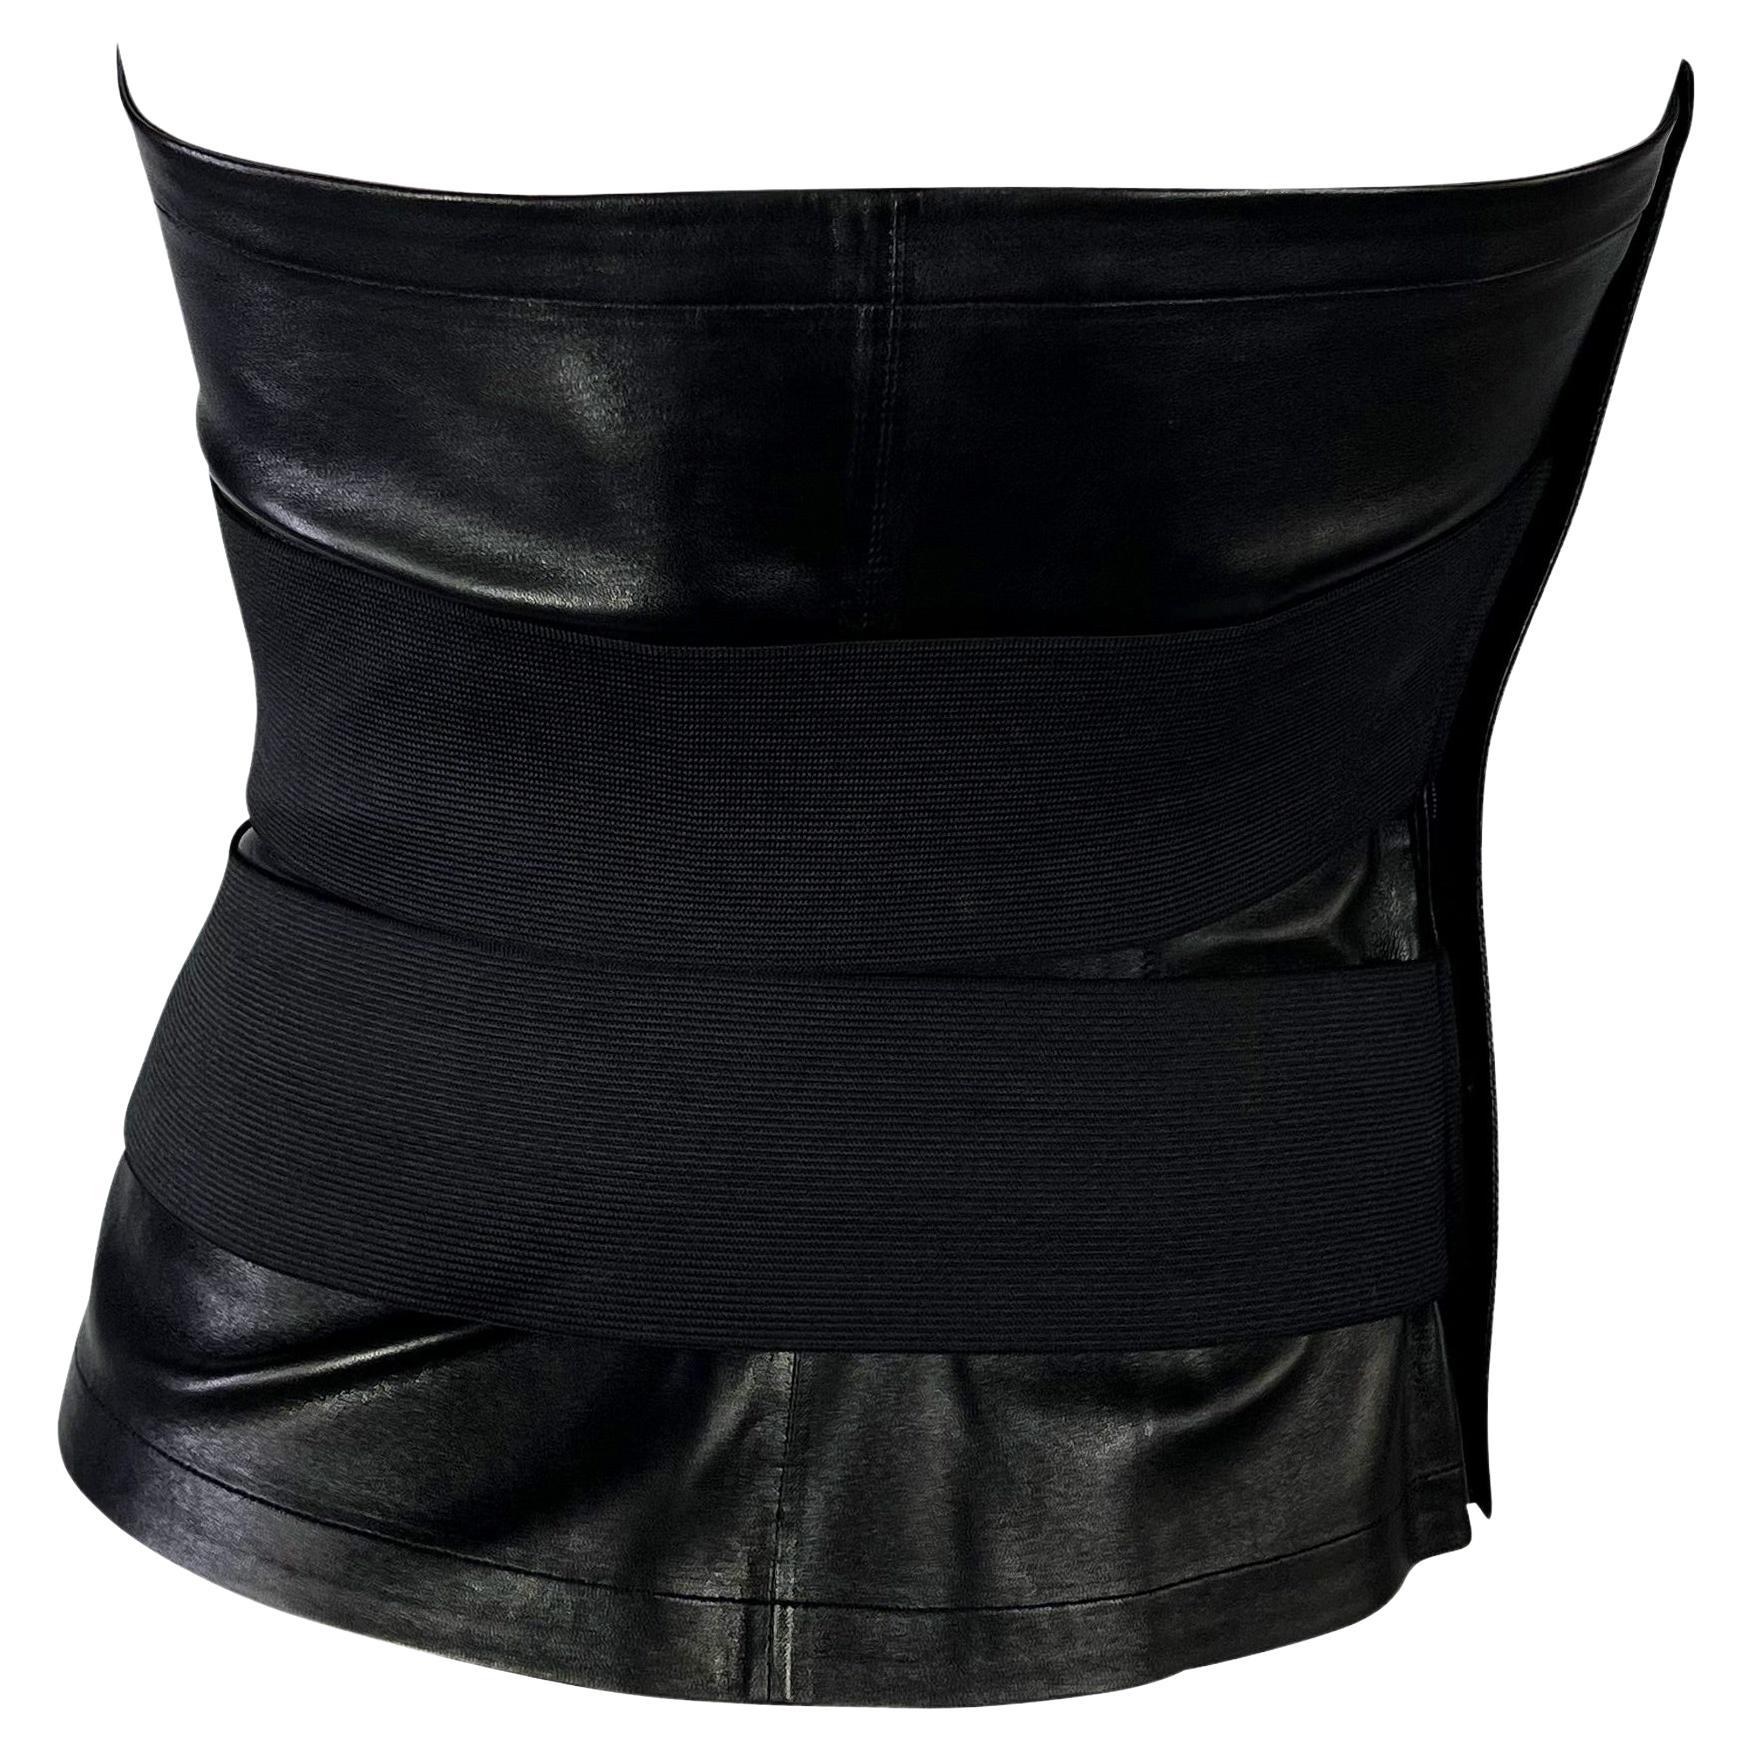 NWT S/S 2001 Yves Saint Laurent by Tom Ford Black Leather Bandage Strap Bustier In Excellent Condition For Sale In West Hollywood, CA